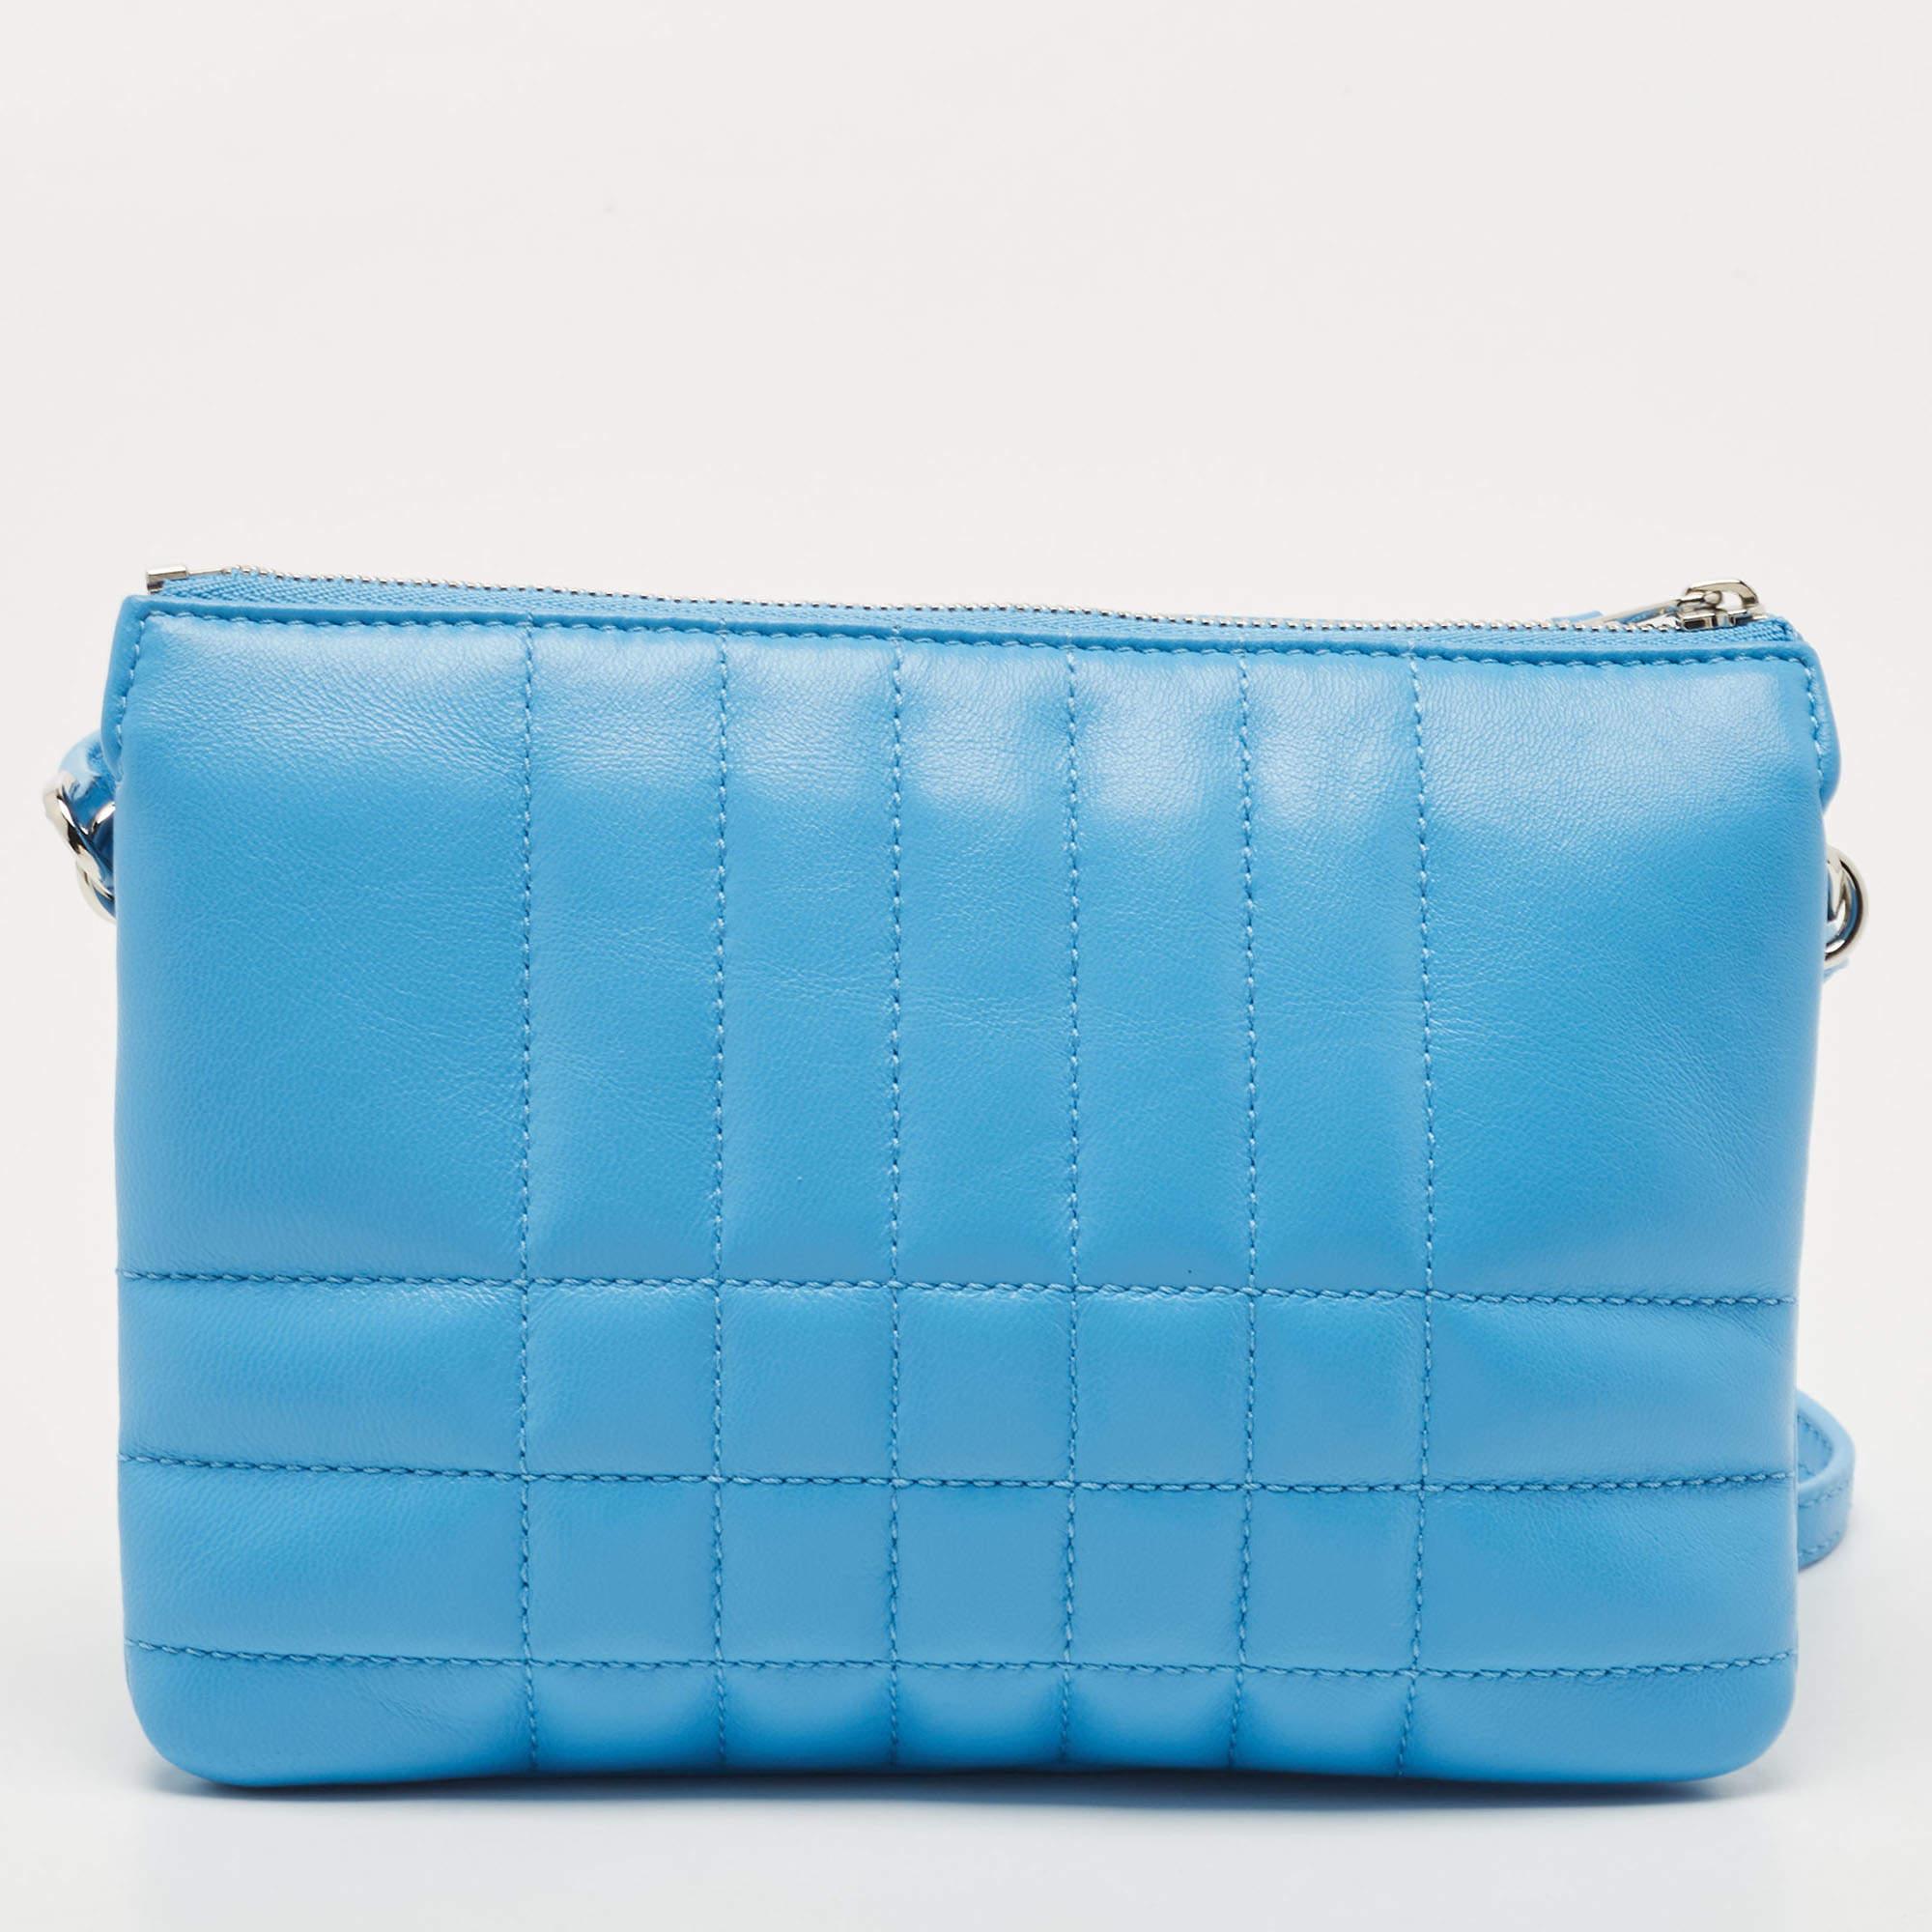 This Lola shoulder bag from Burberry does complete justice to the brand's timeless aesthetic. Externally, it is made using blue and quilted leather with a silver-tone TB accent decorating the front. It features a shoulder strap and an interior in